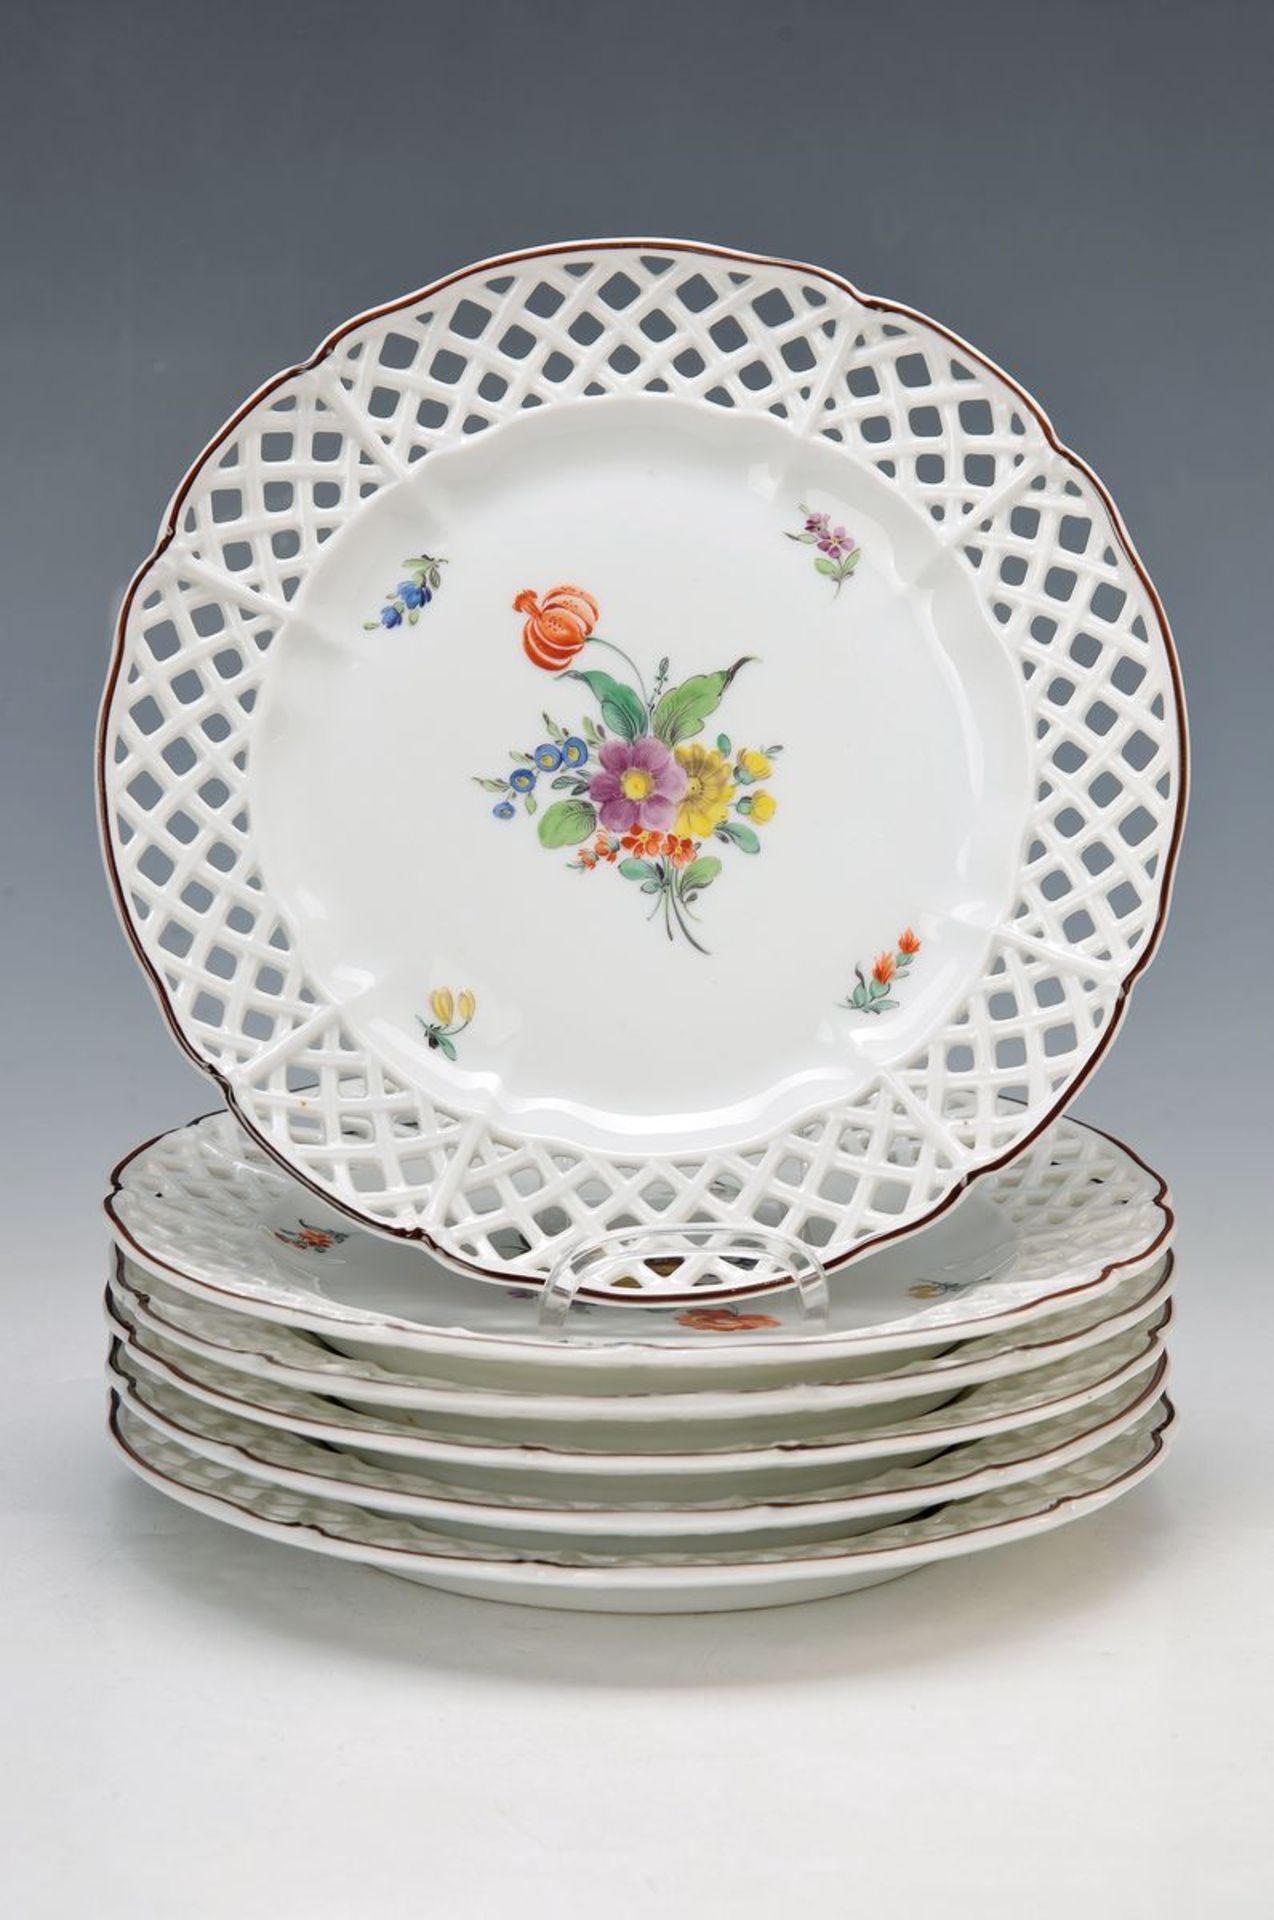 6 pastry plates, Nymphenburg, around 1920, fine colorful flower painting, banners with openwork